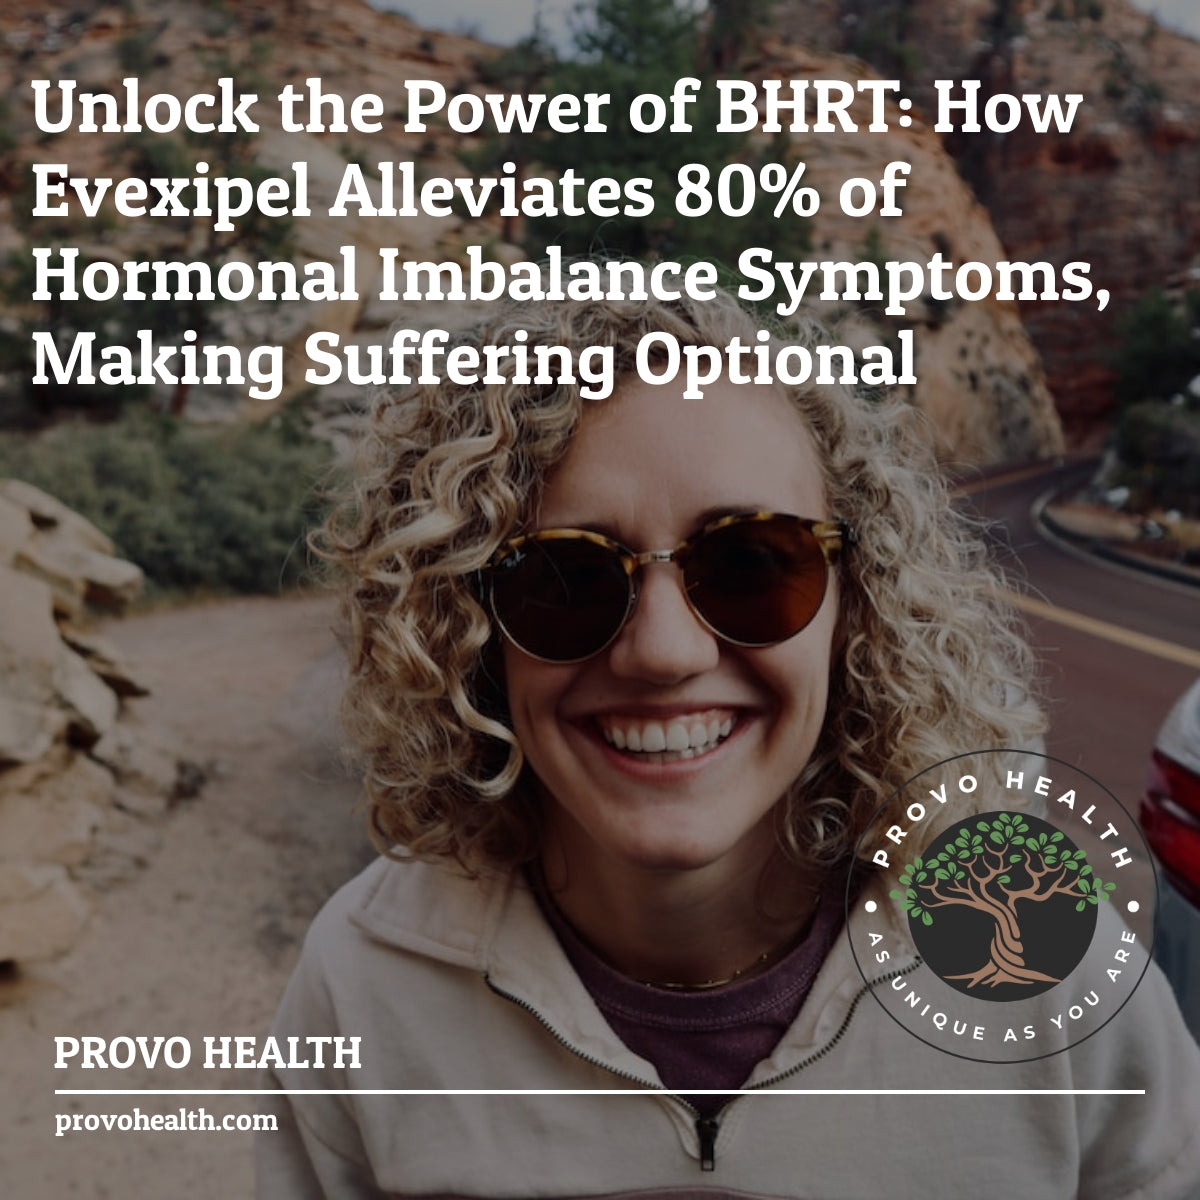 Unlock the Power of BHRT: How Evexipel Alleviates 80% of Hormonal Imbalance Symptoms, Making Suffering Optional